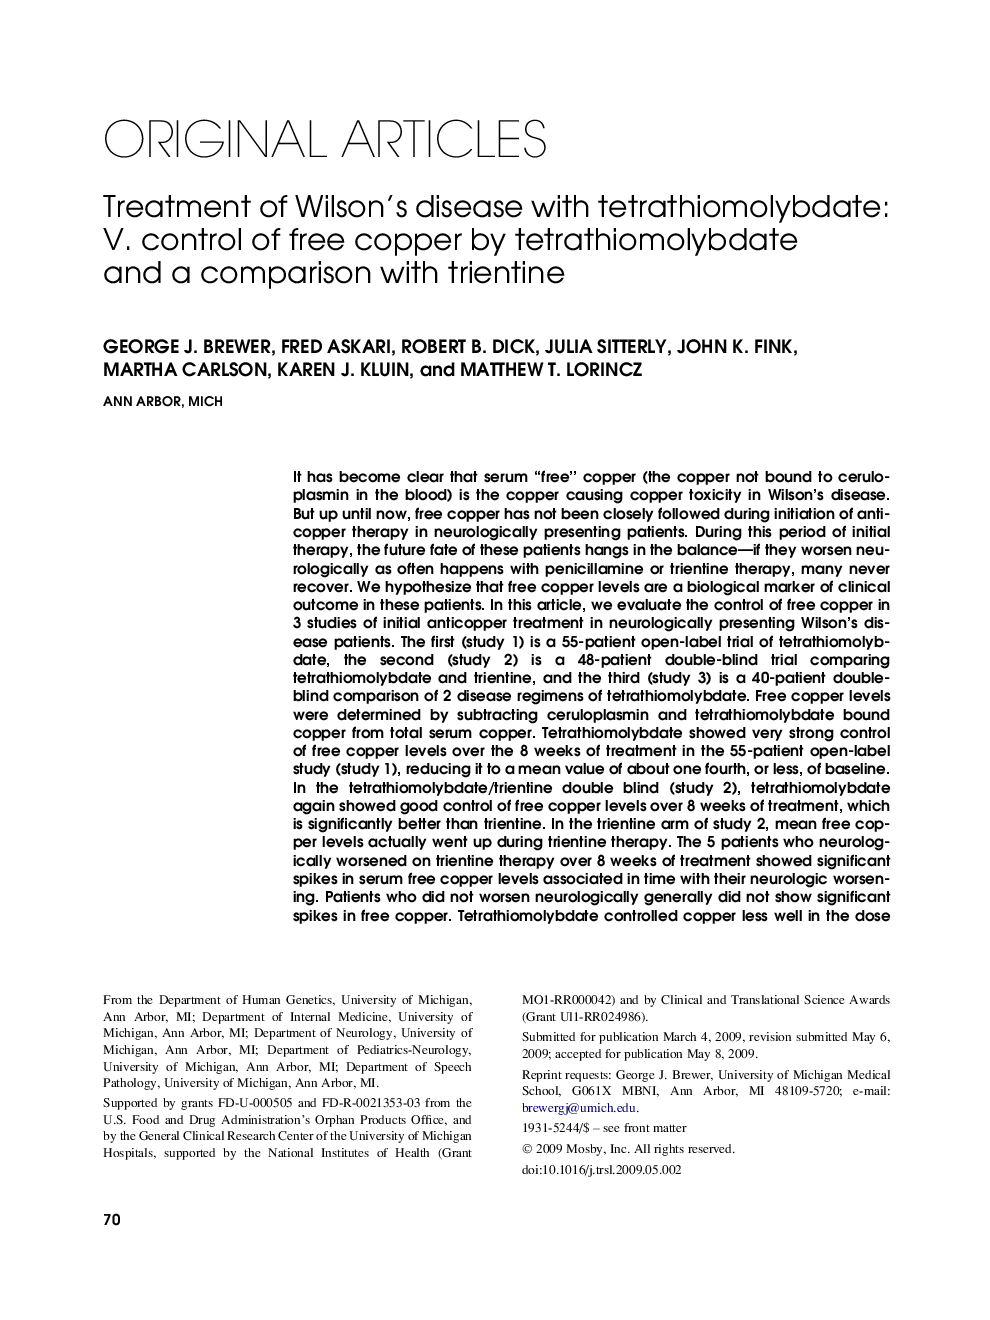 Treatment of Wilson's disease with tetrathiomolybdate: V. control of free copper by tetrathiomolybdate and a comparison with trientine 